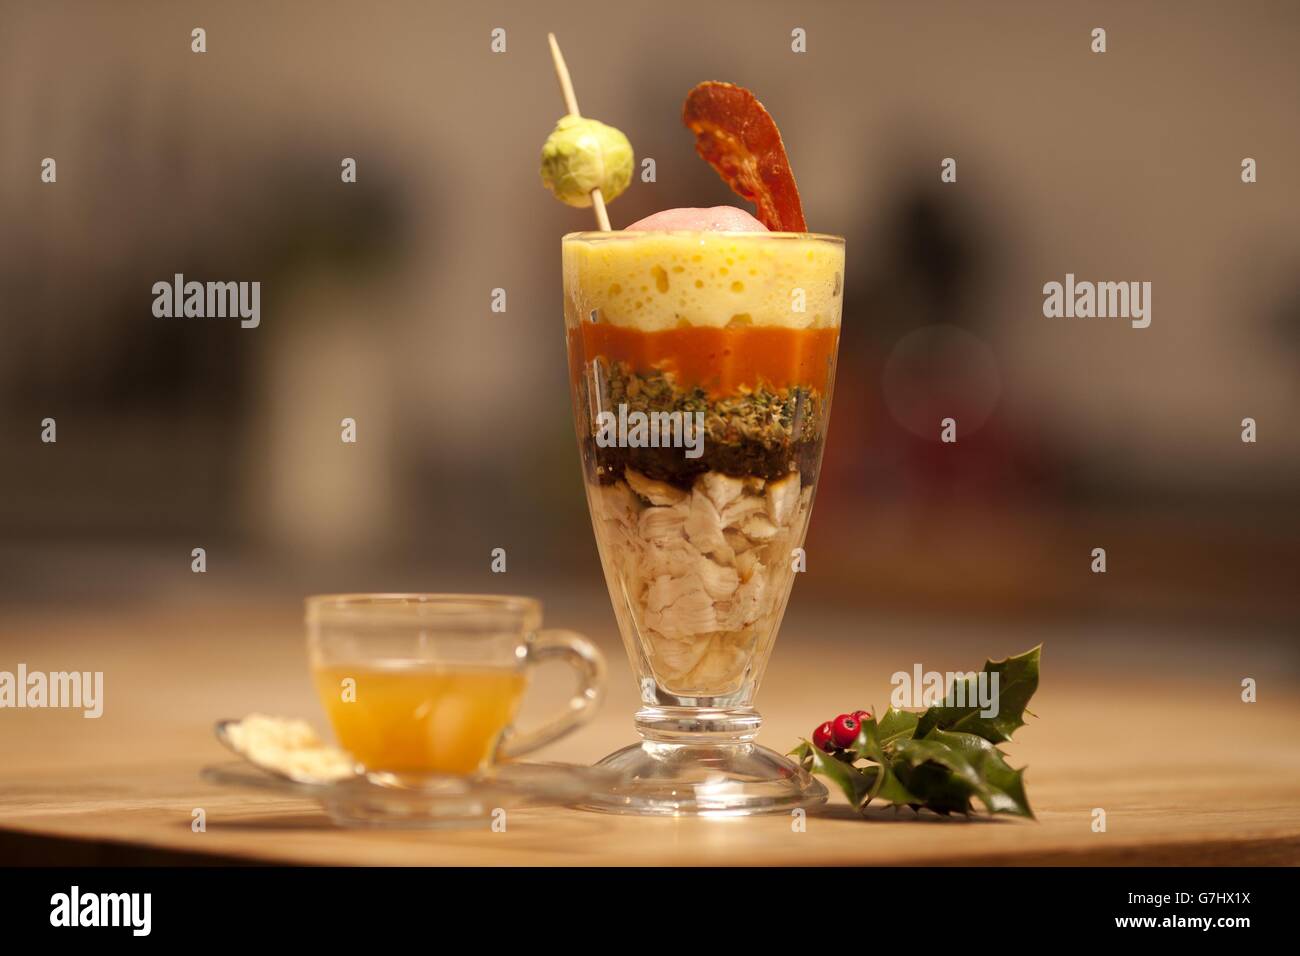 A 294 calorie Christmas lunch in a sundae glass suitable for jockeys, which was created by William Hill commissioned food scientist Dr Rachel Edwards-Stuart ahead of the King George VI Chase on Boxing Day. Stock Photo